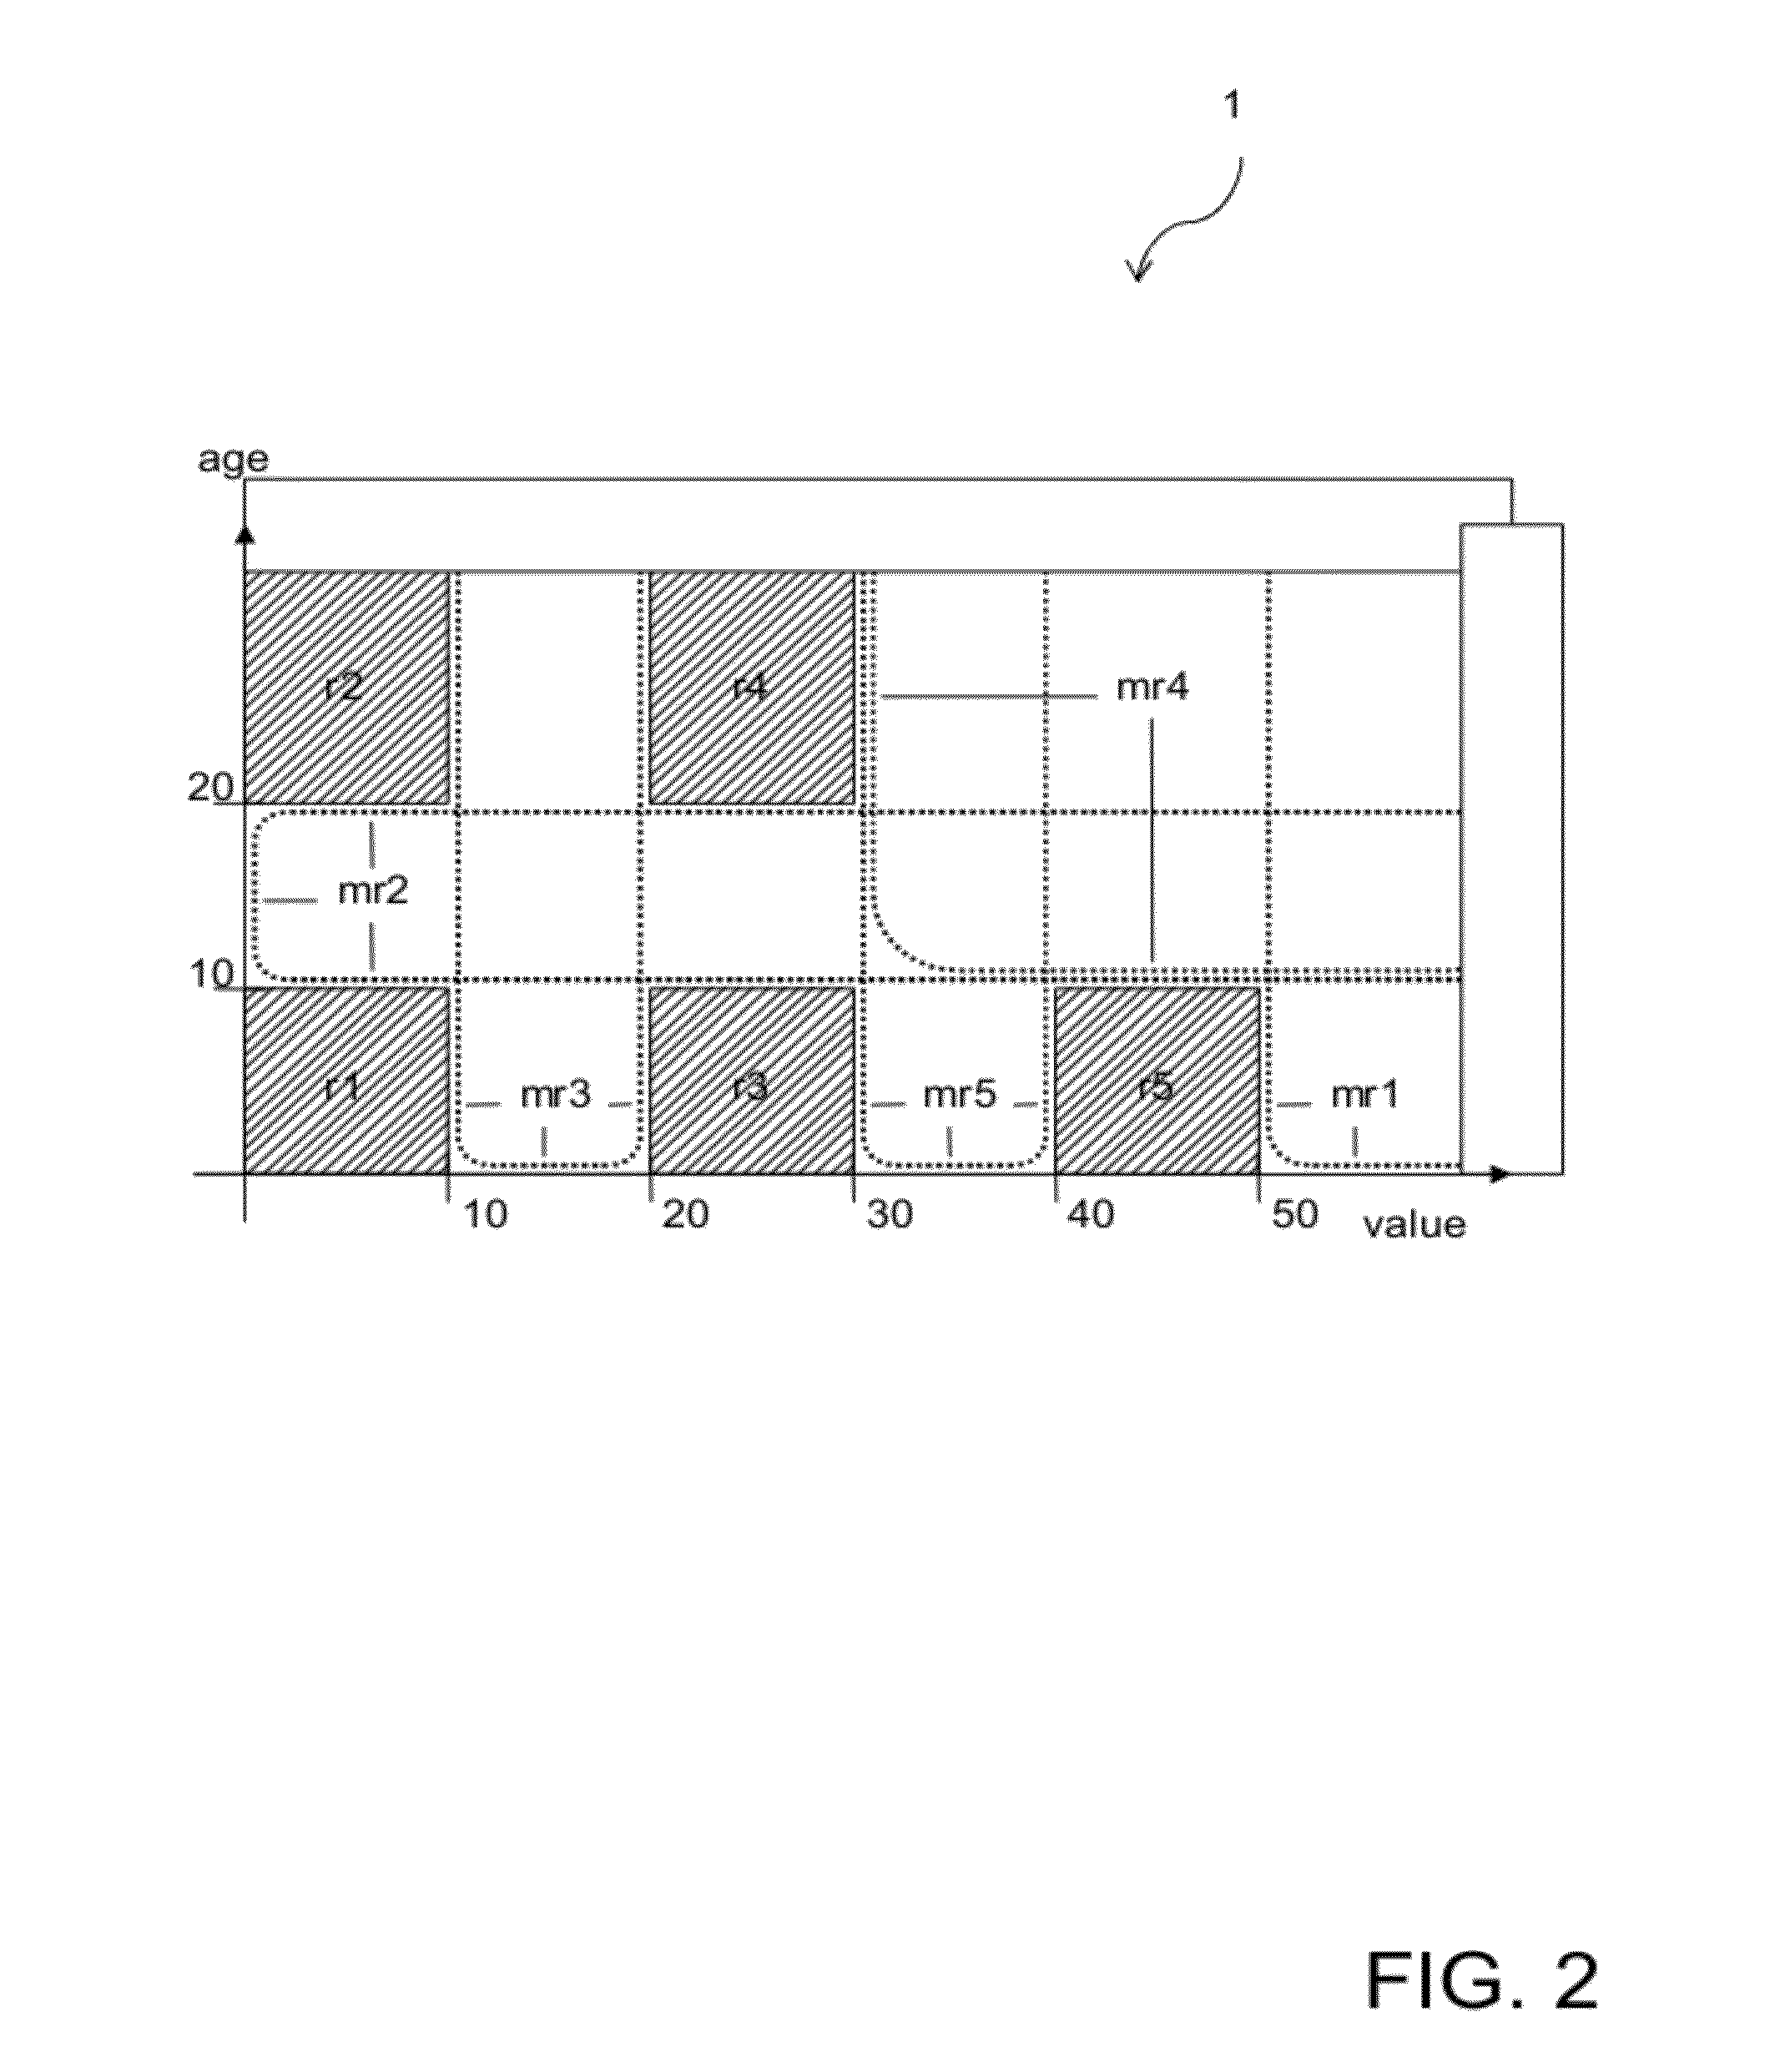 Method and System for Detecting Missing Rules with Most General Conditions